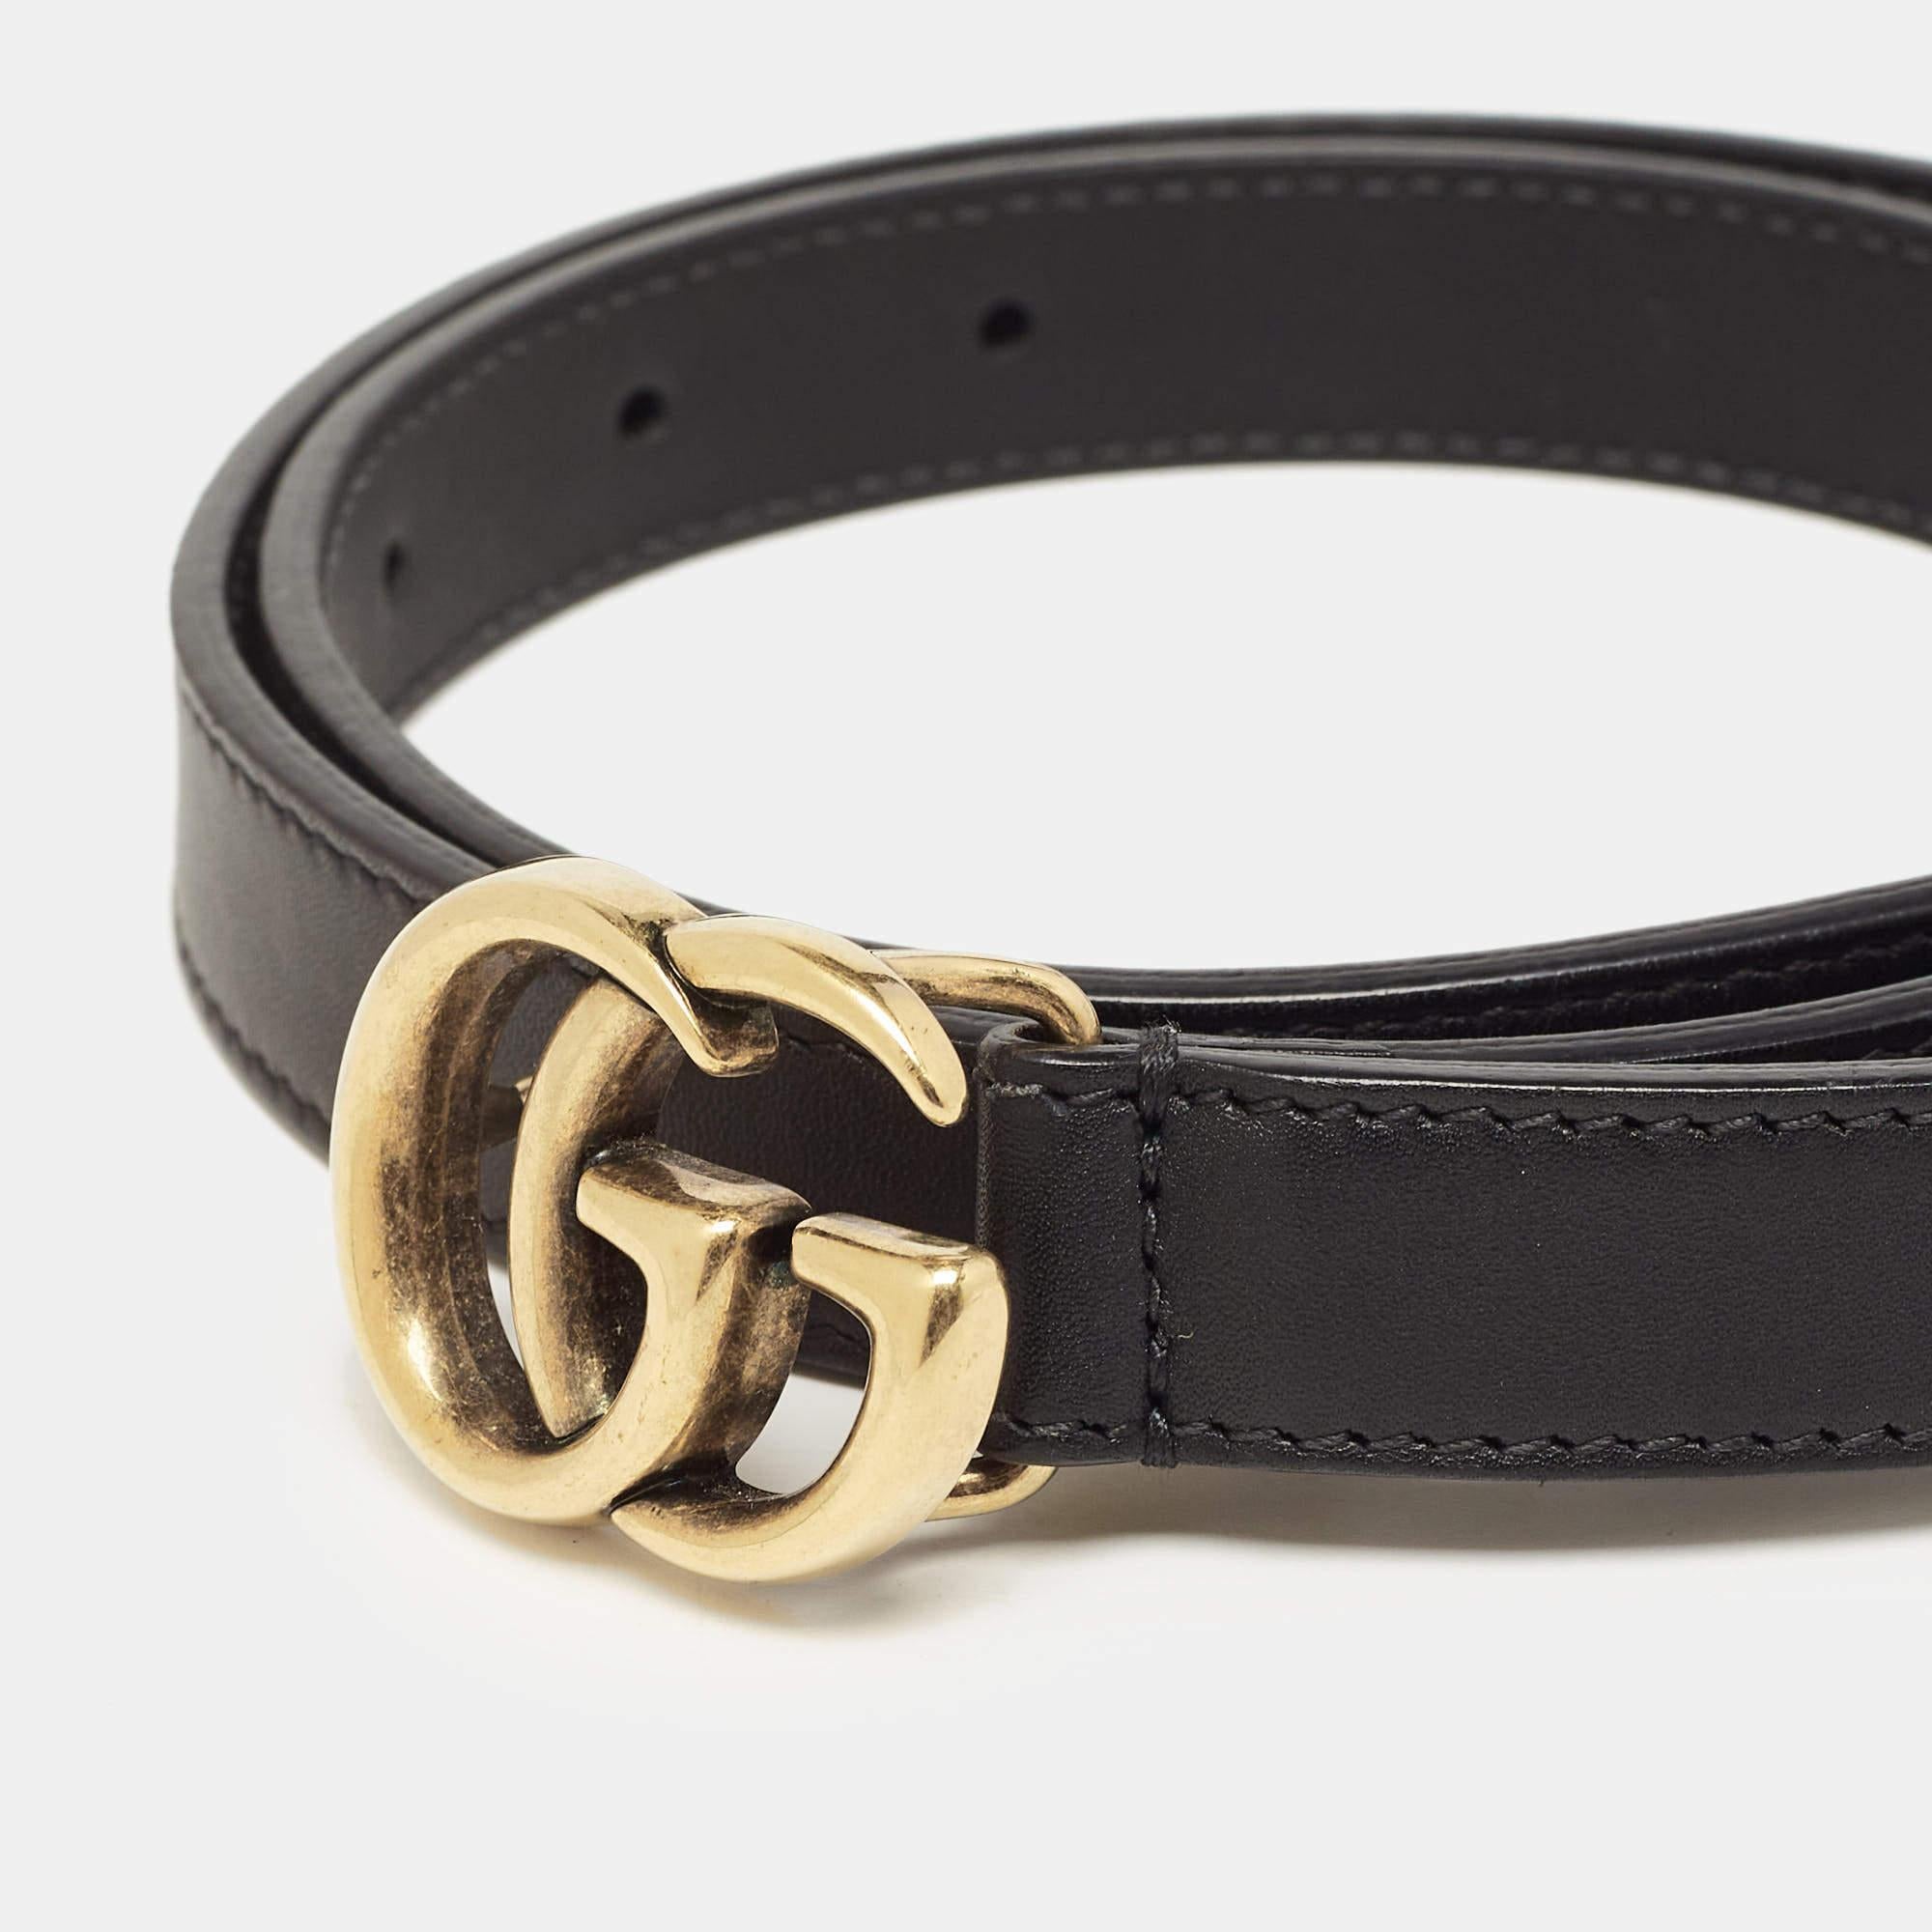 Showcasing the classic sophistication of Gucci, this elegant Double G Buckle belt is timelessly chic. Crafted from leather in black, it features the signature Double G buckle in gold-tone hardware.

Includes: Info Booklet, Brand Box, Brand Dustbag